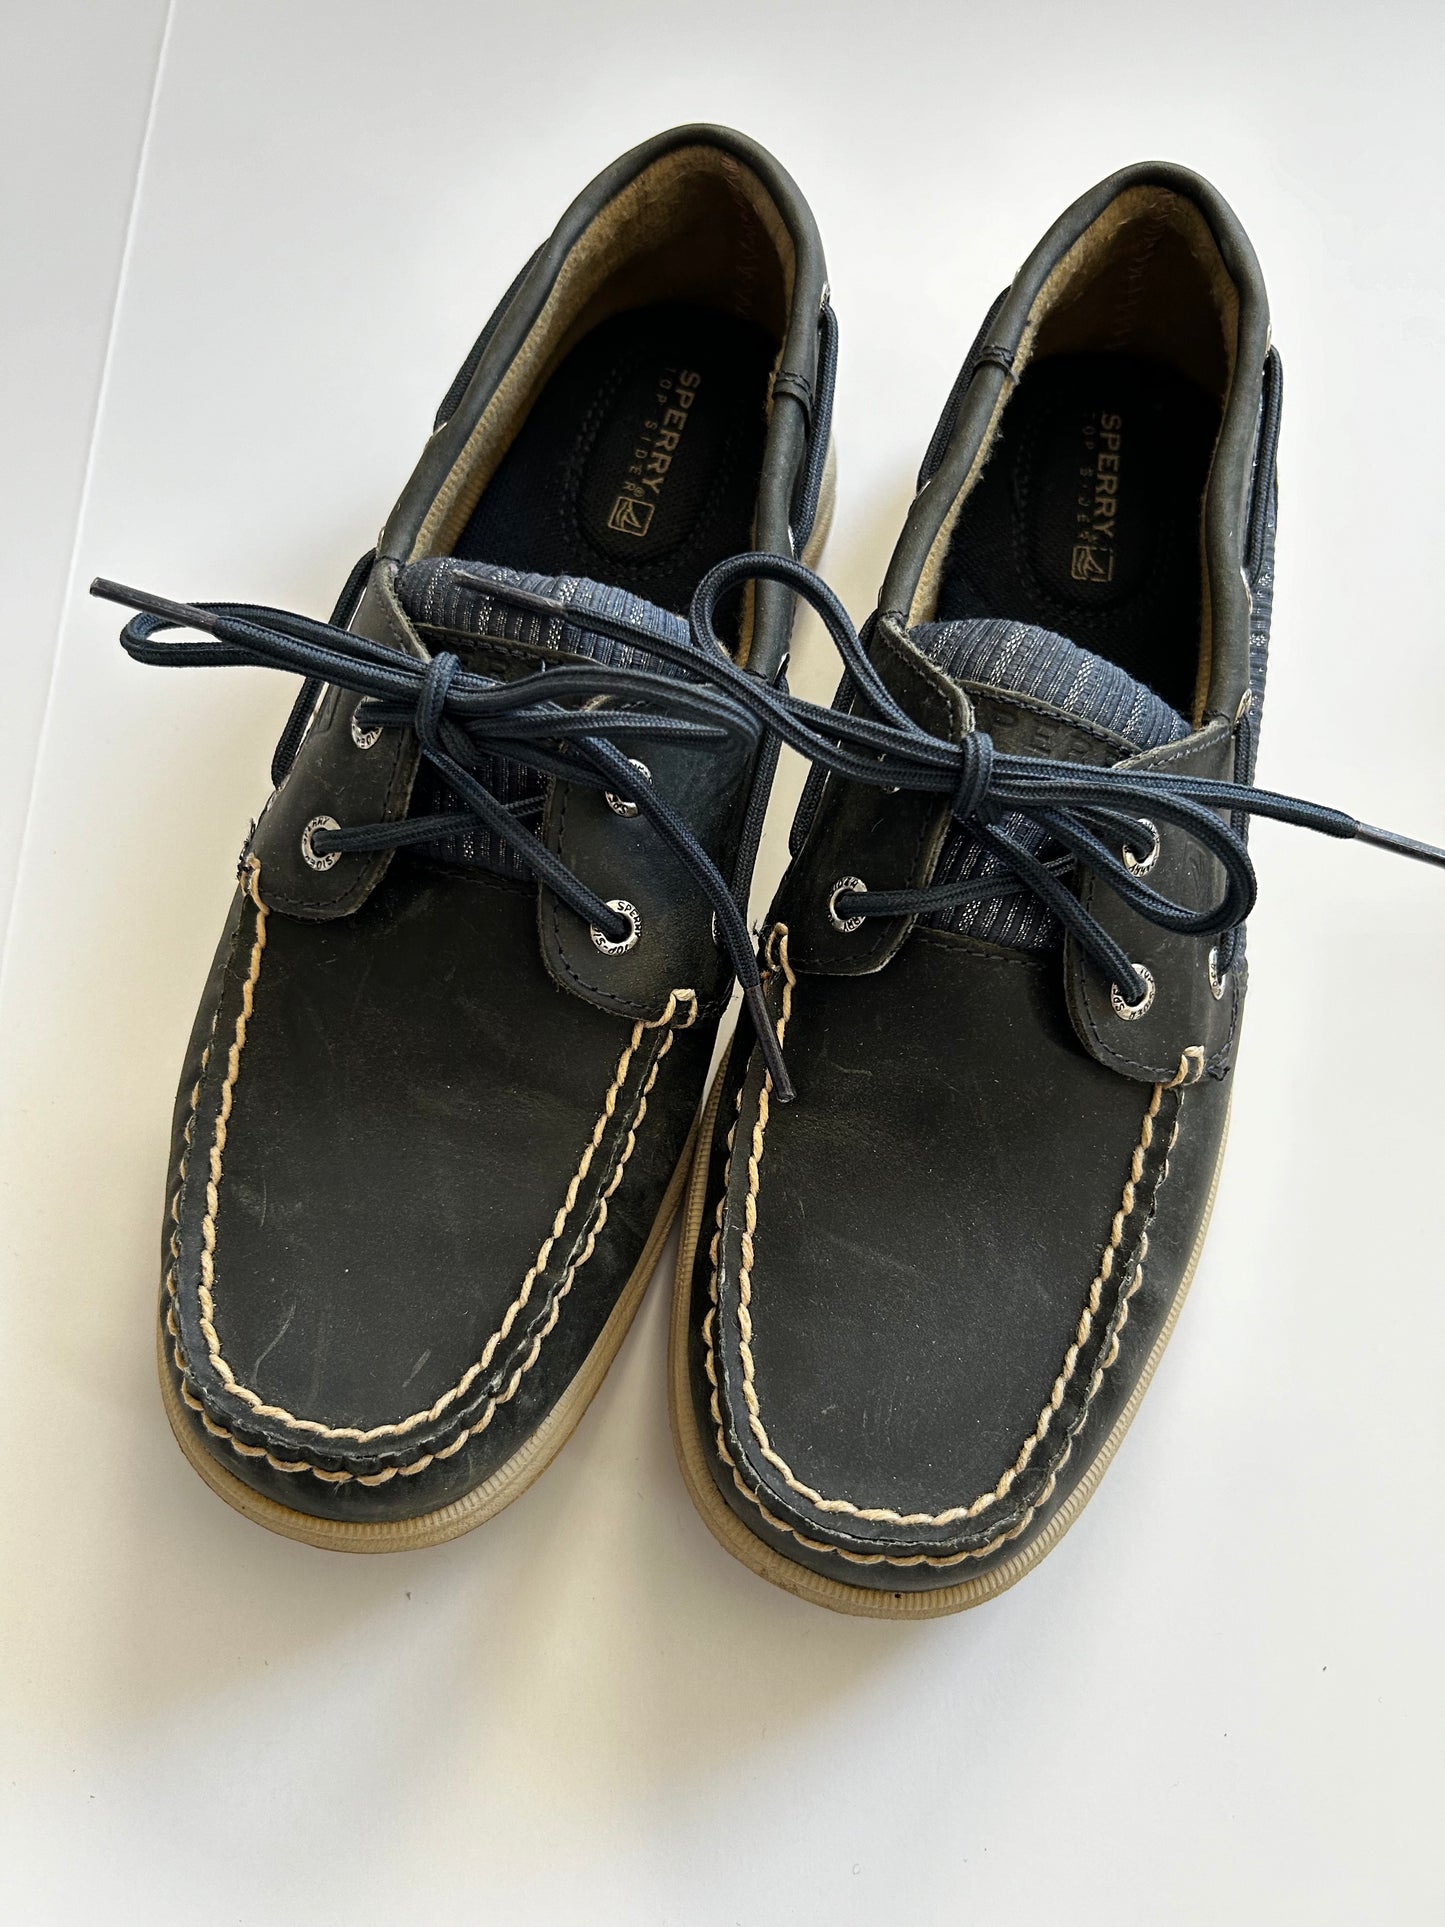 Size 8.5 Women's Navy Sperry Top Sider